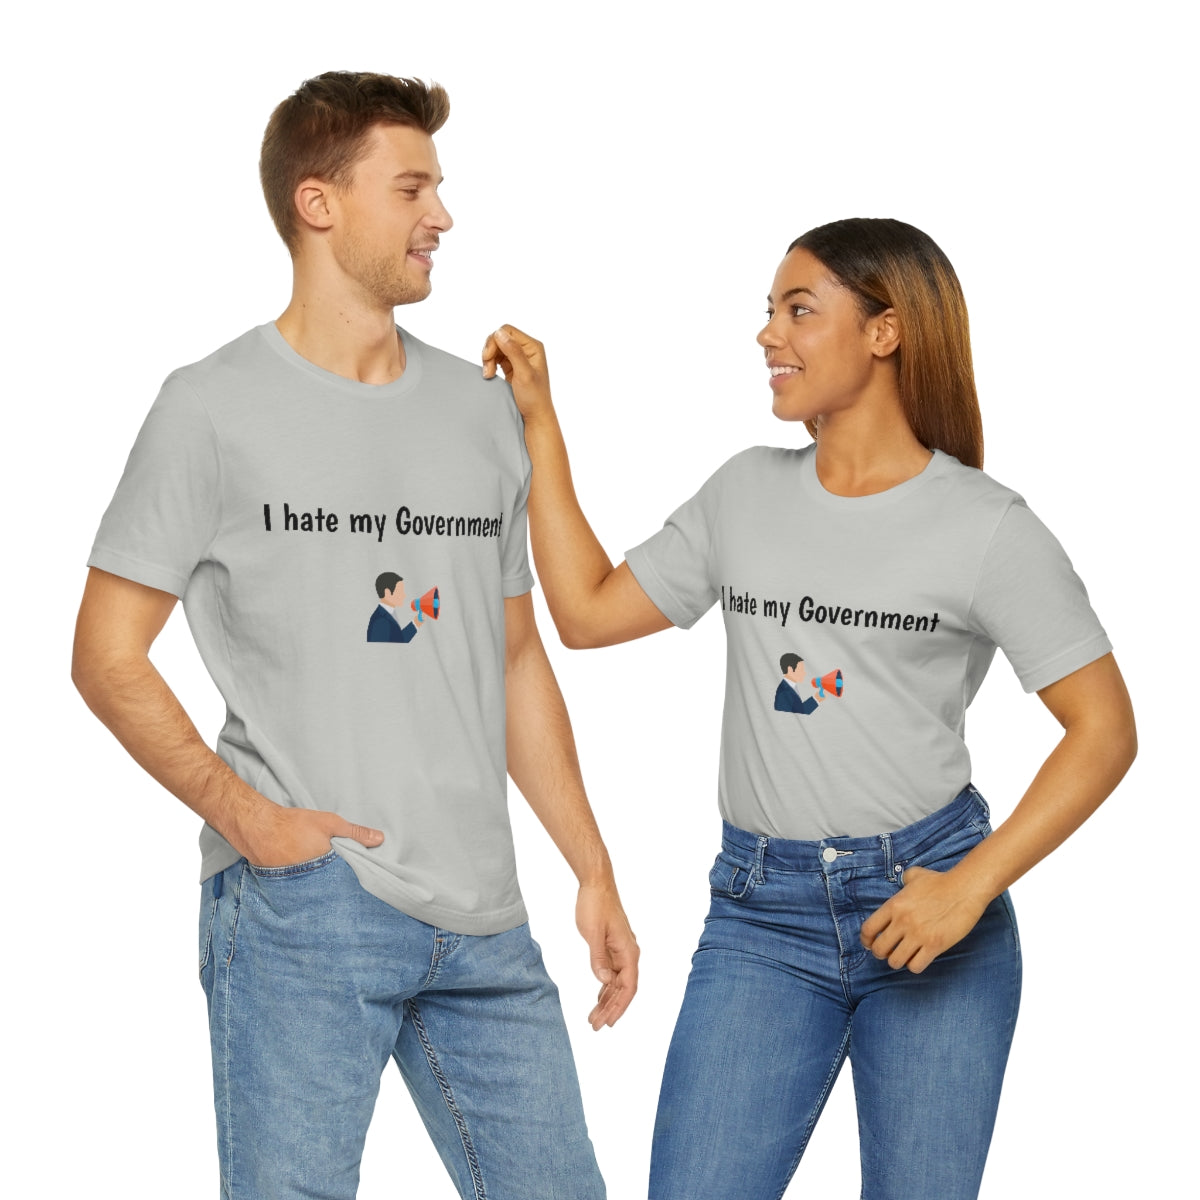 I hate my government - Funny - Unisex Short Sleeve Tee